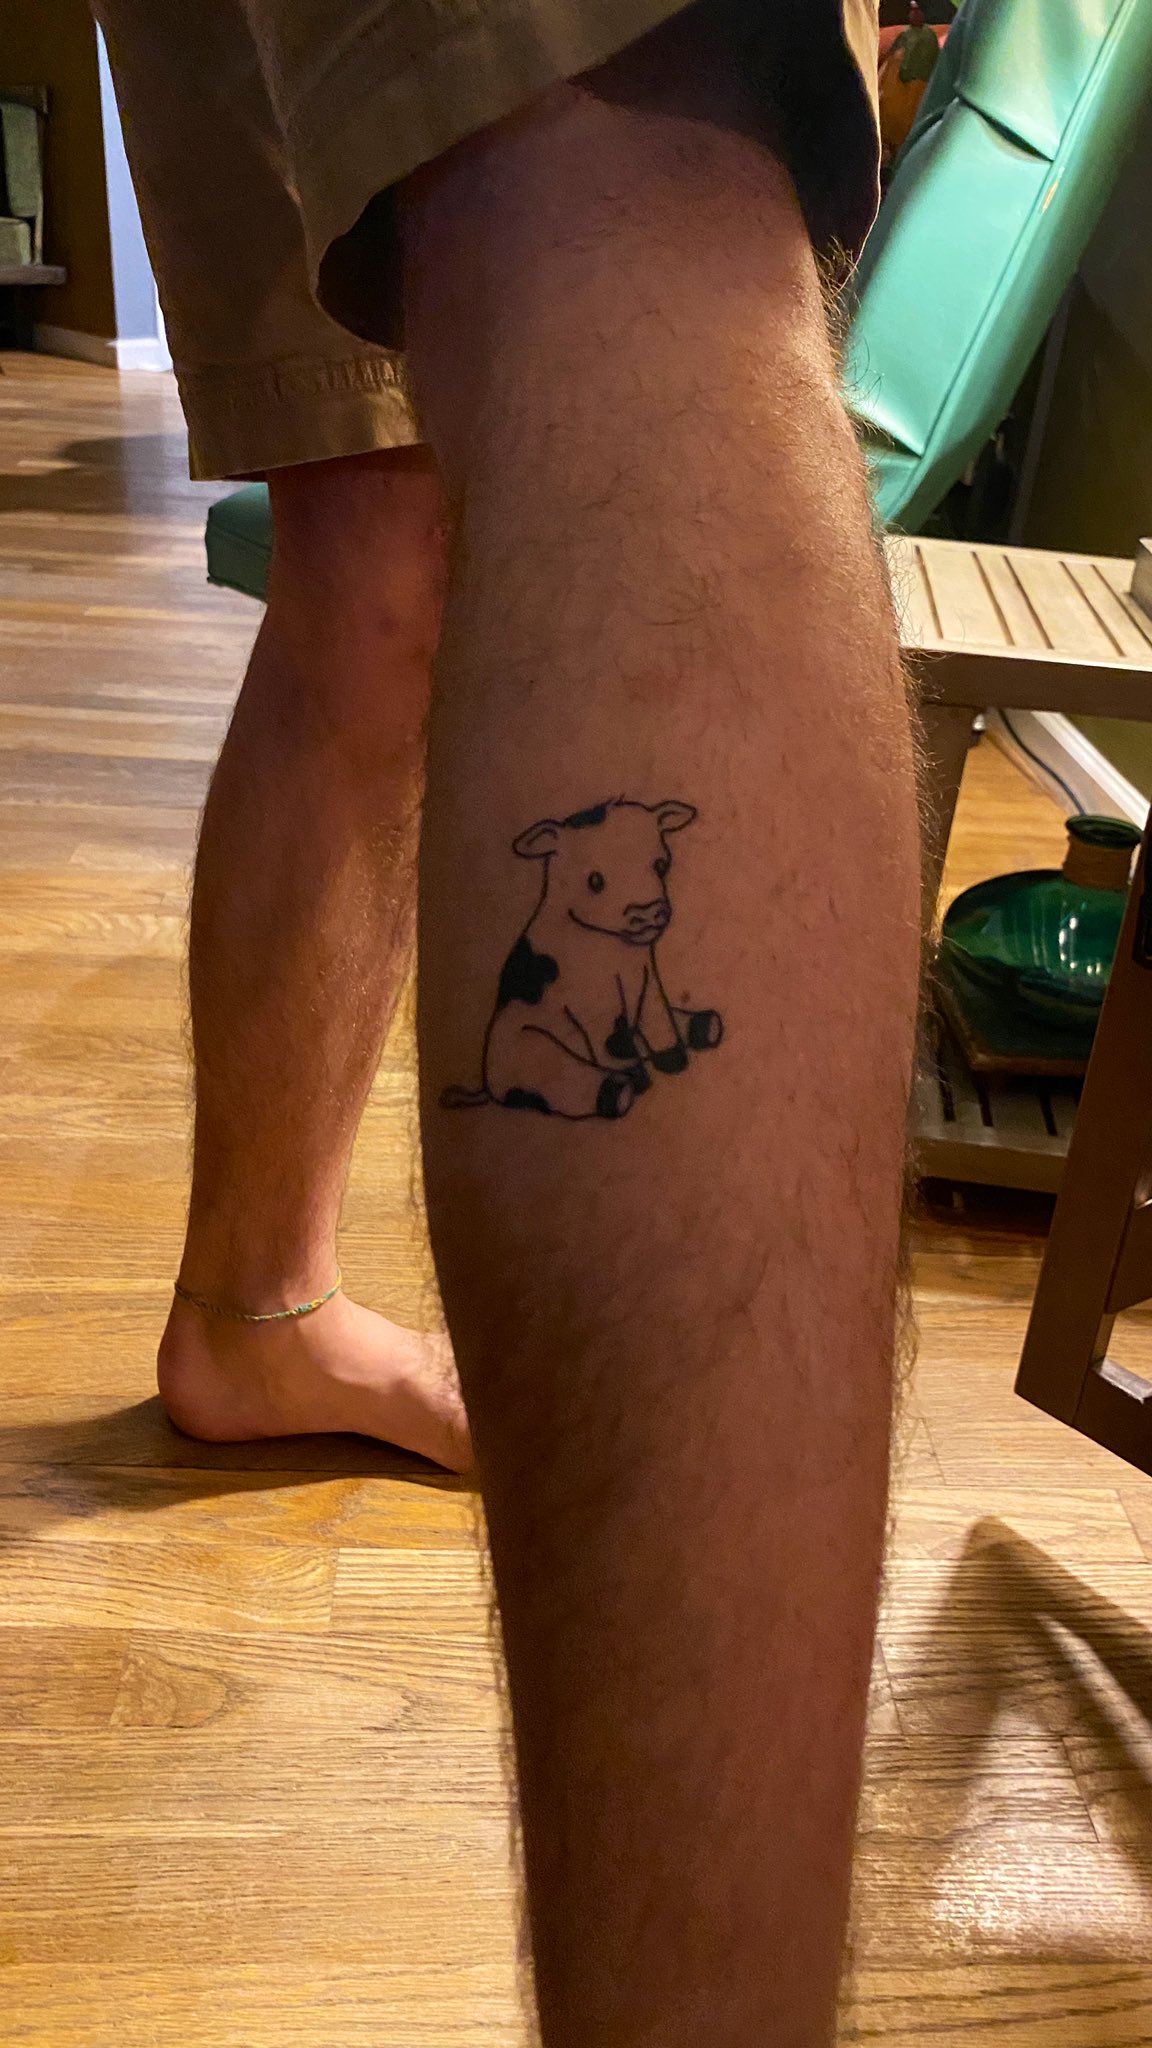 BURN DOWN THE DISCO  one 1 person told me to post my two headed calf